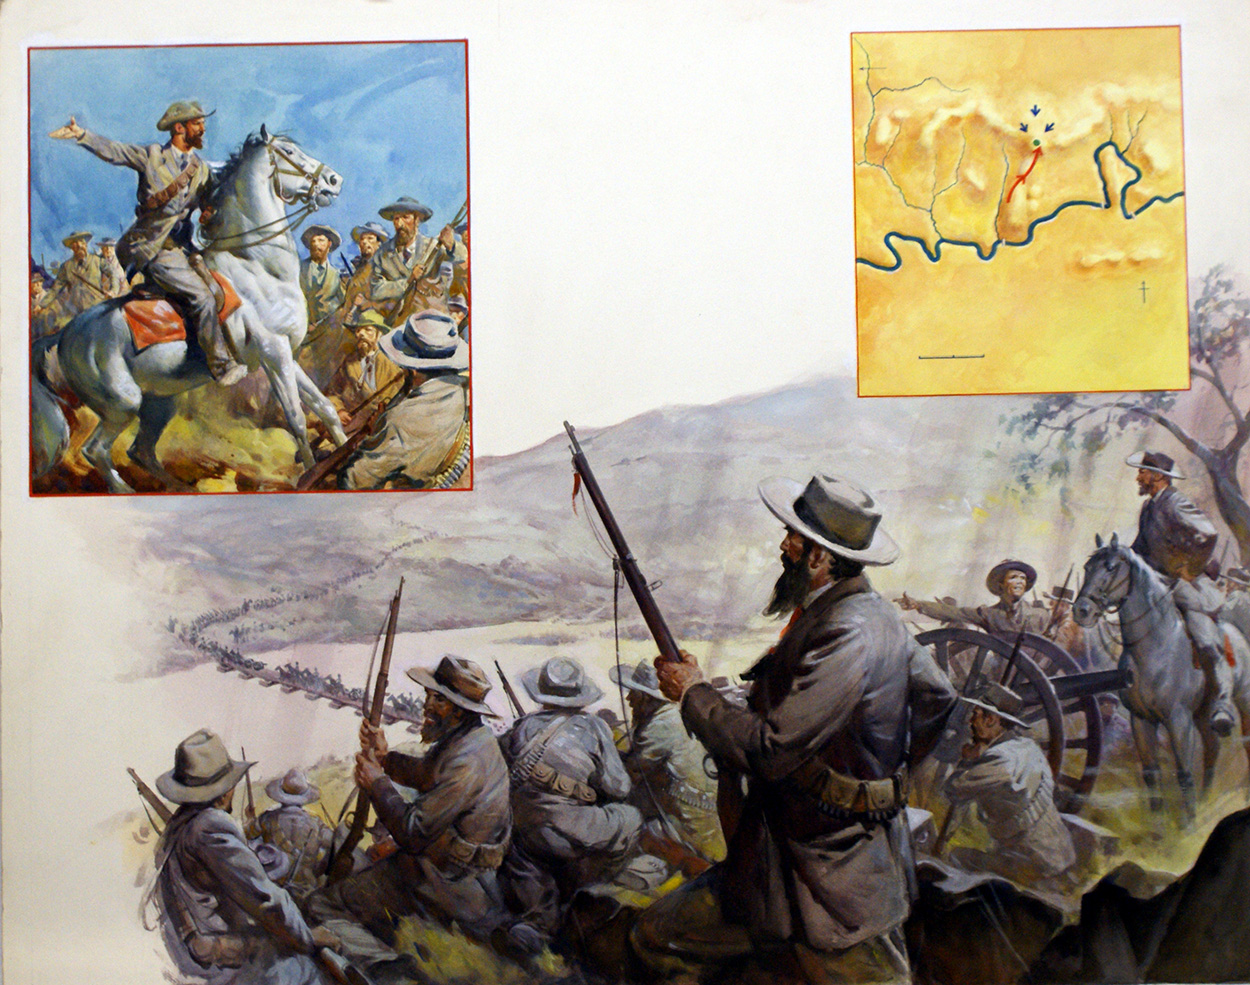 Louis Botha & the Battle of Spion Kop (Original) art by James E McConnell at The Illustration Art Gallery